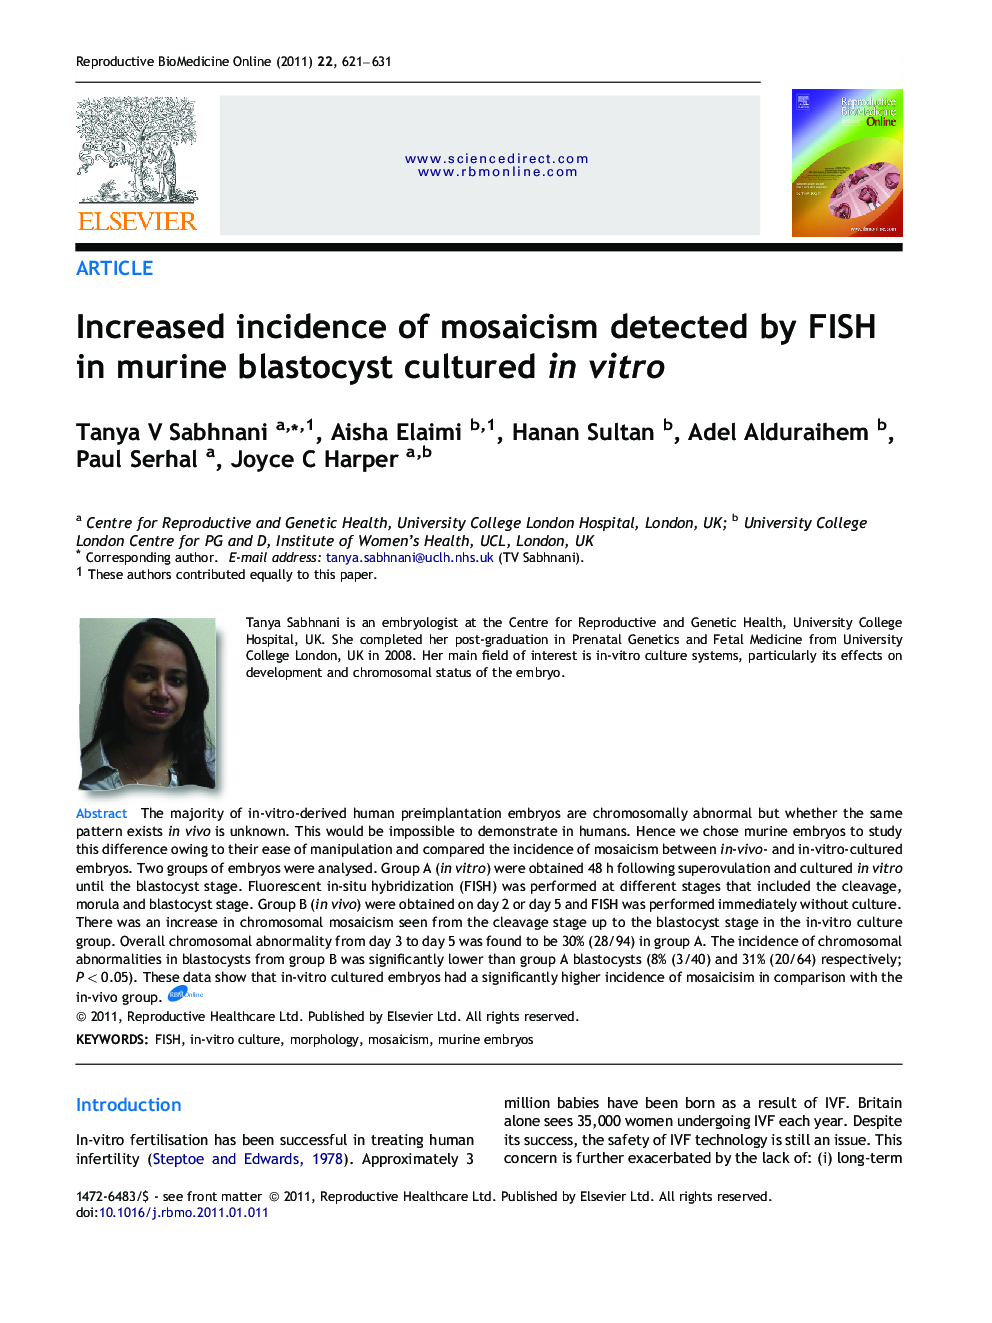 Increased incidence of mosaicism detected by FISH in murine blastocyst cultured in vitro 